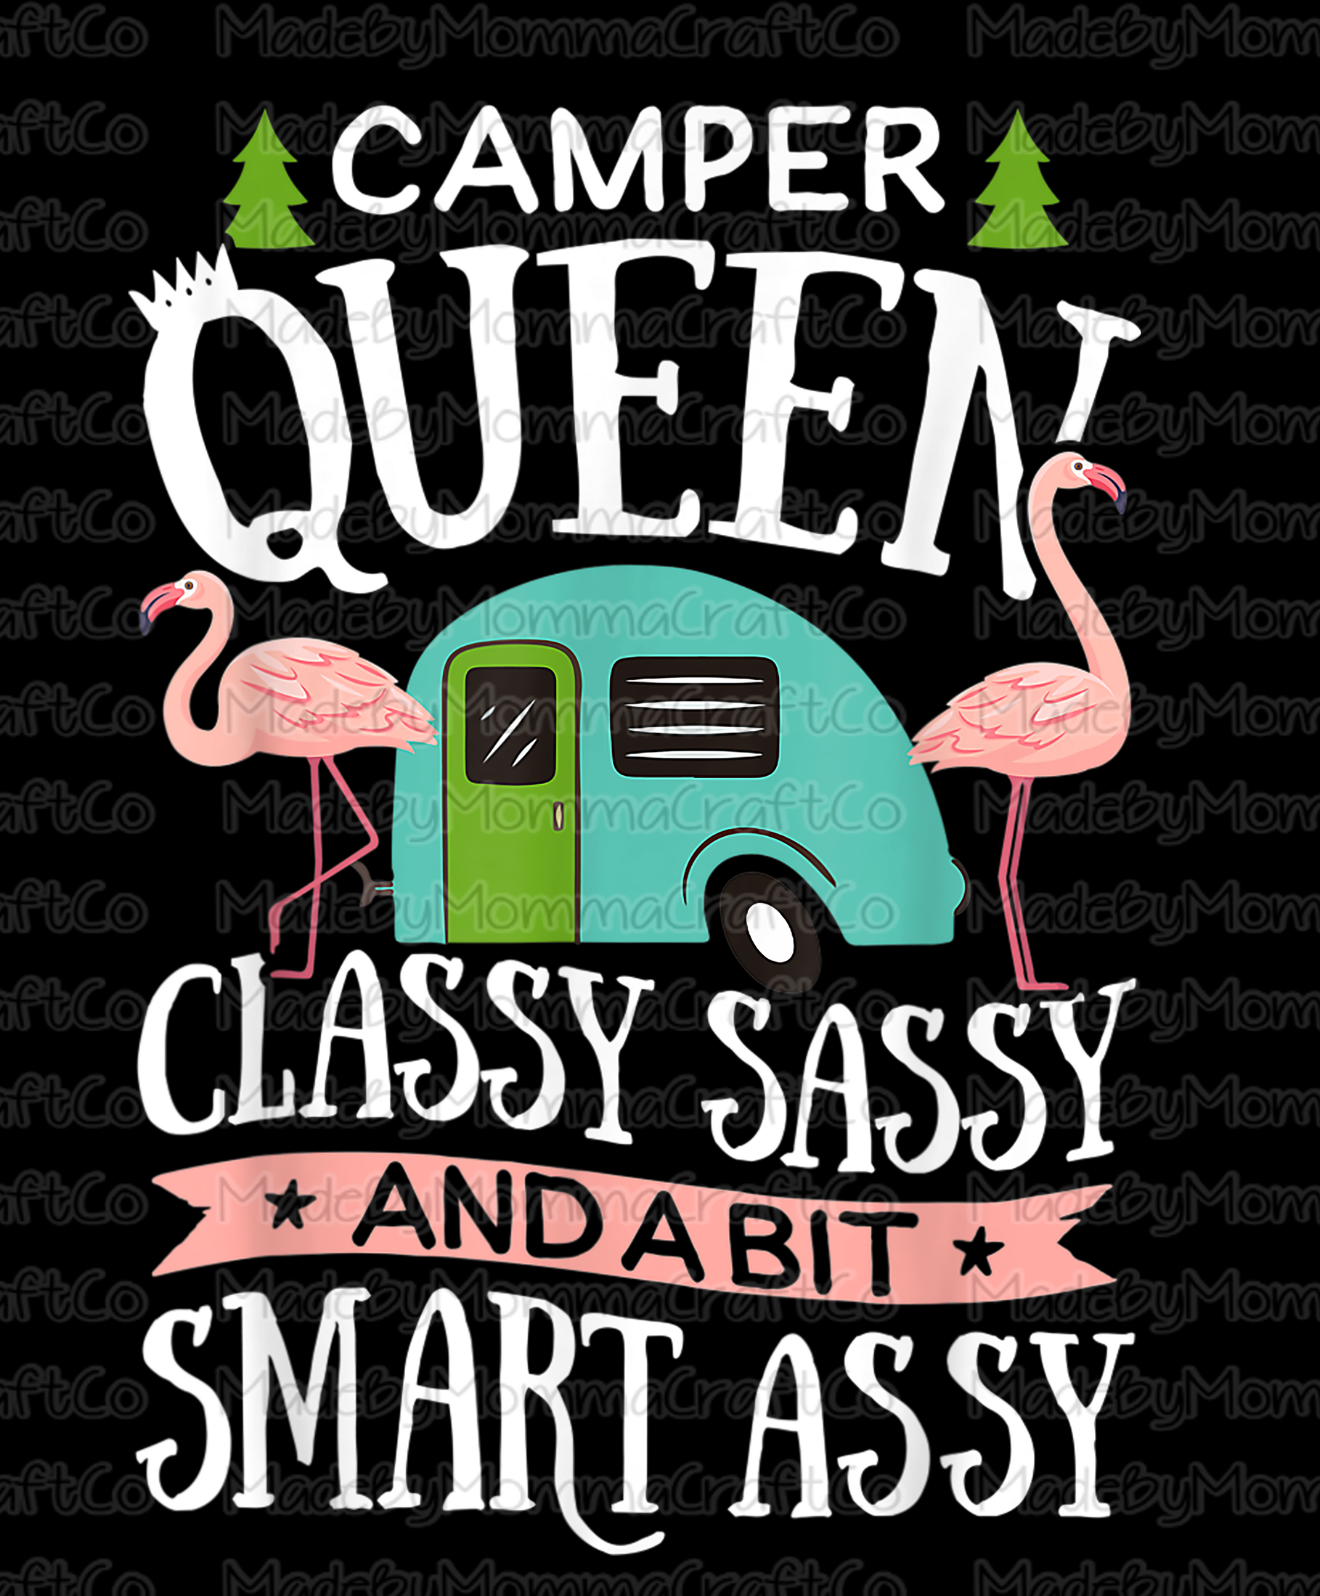 Sassy Teacher Stickers and Decal Sheets | LookHUMAN